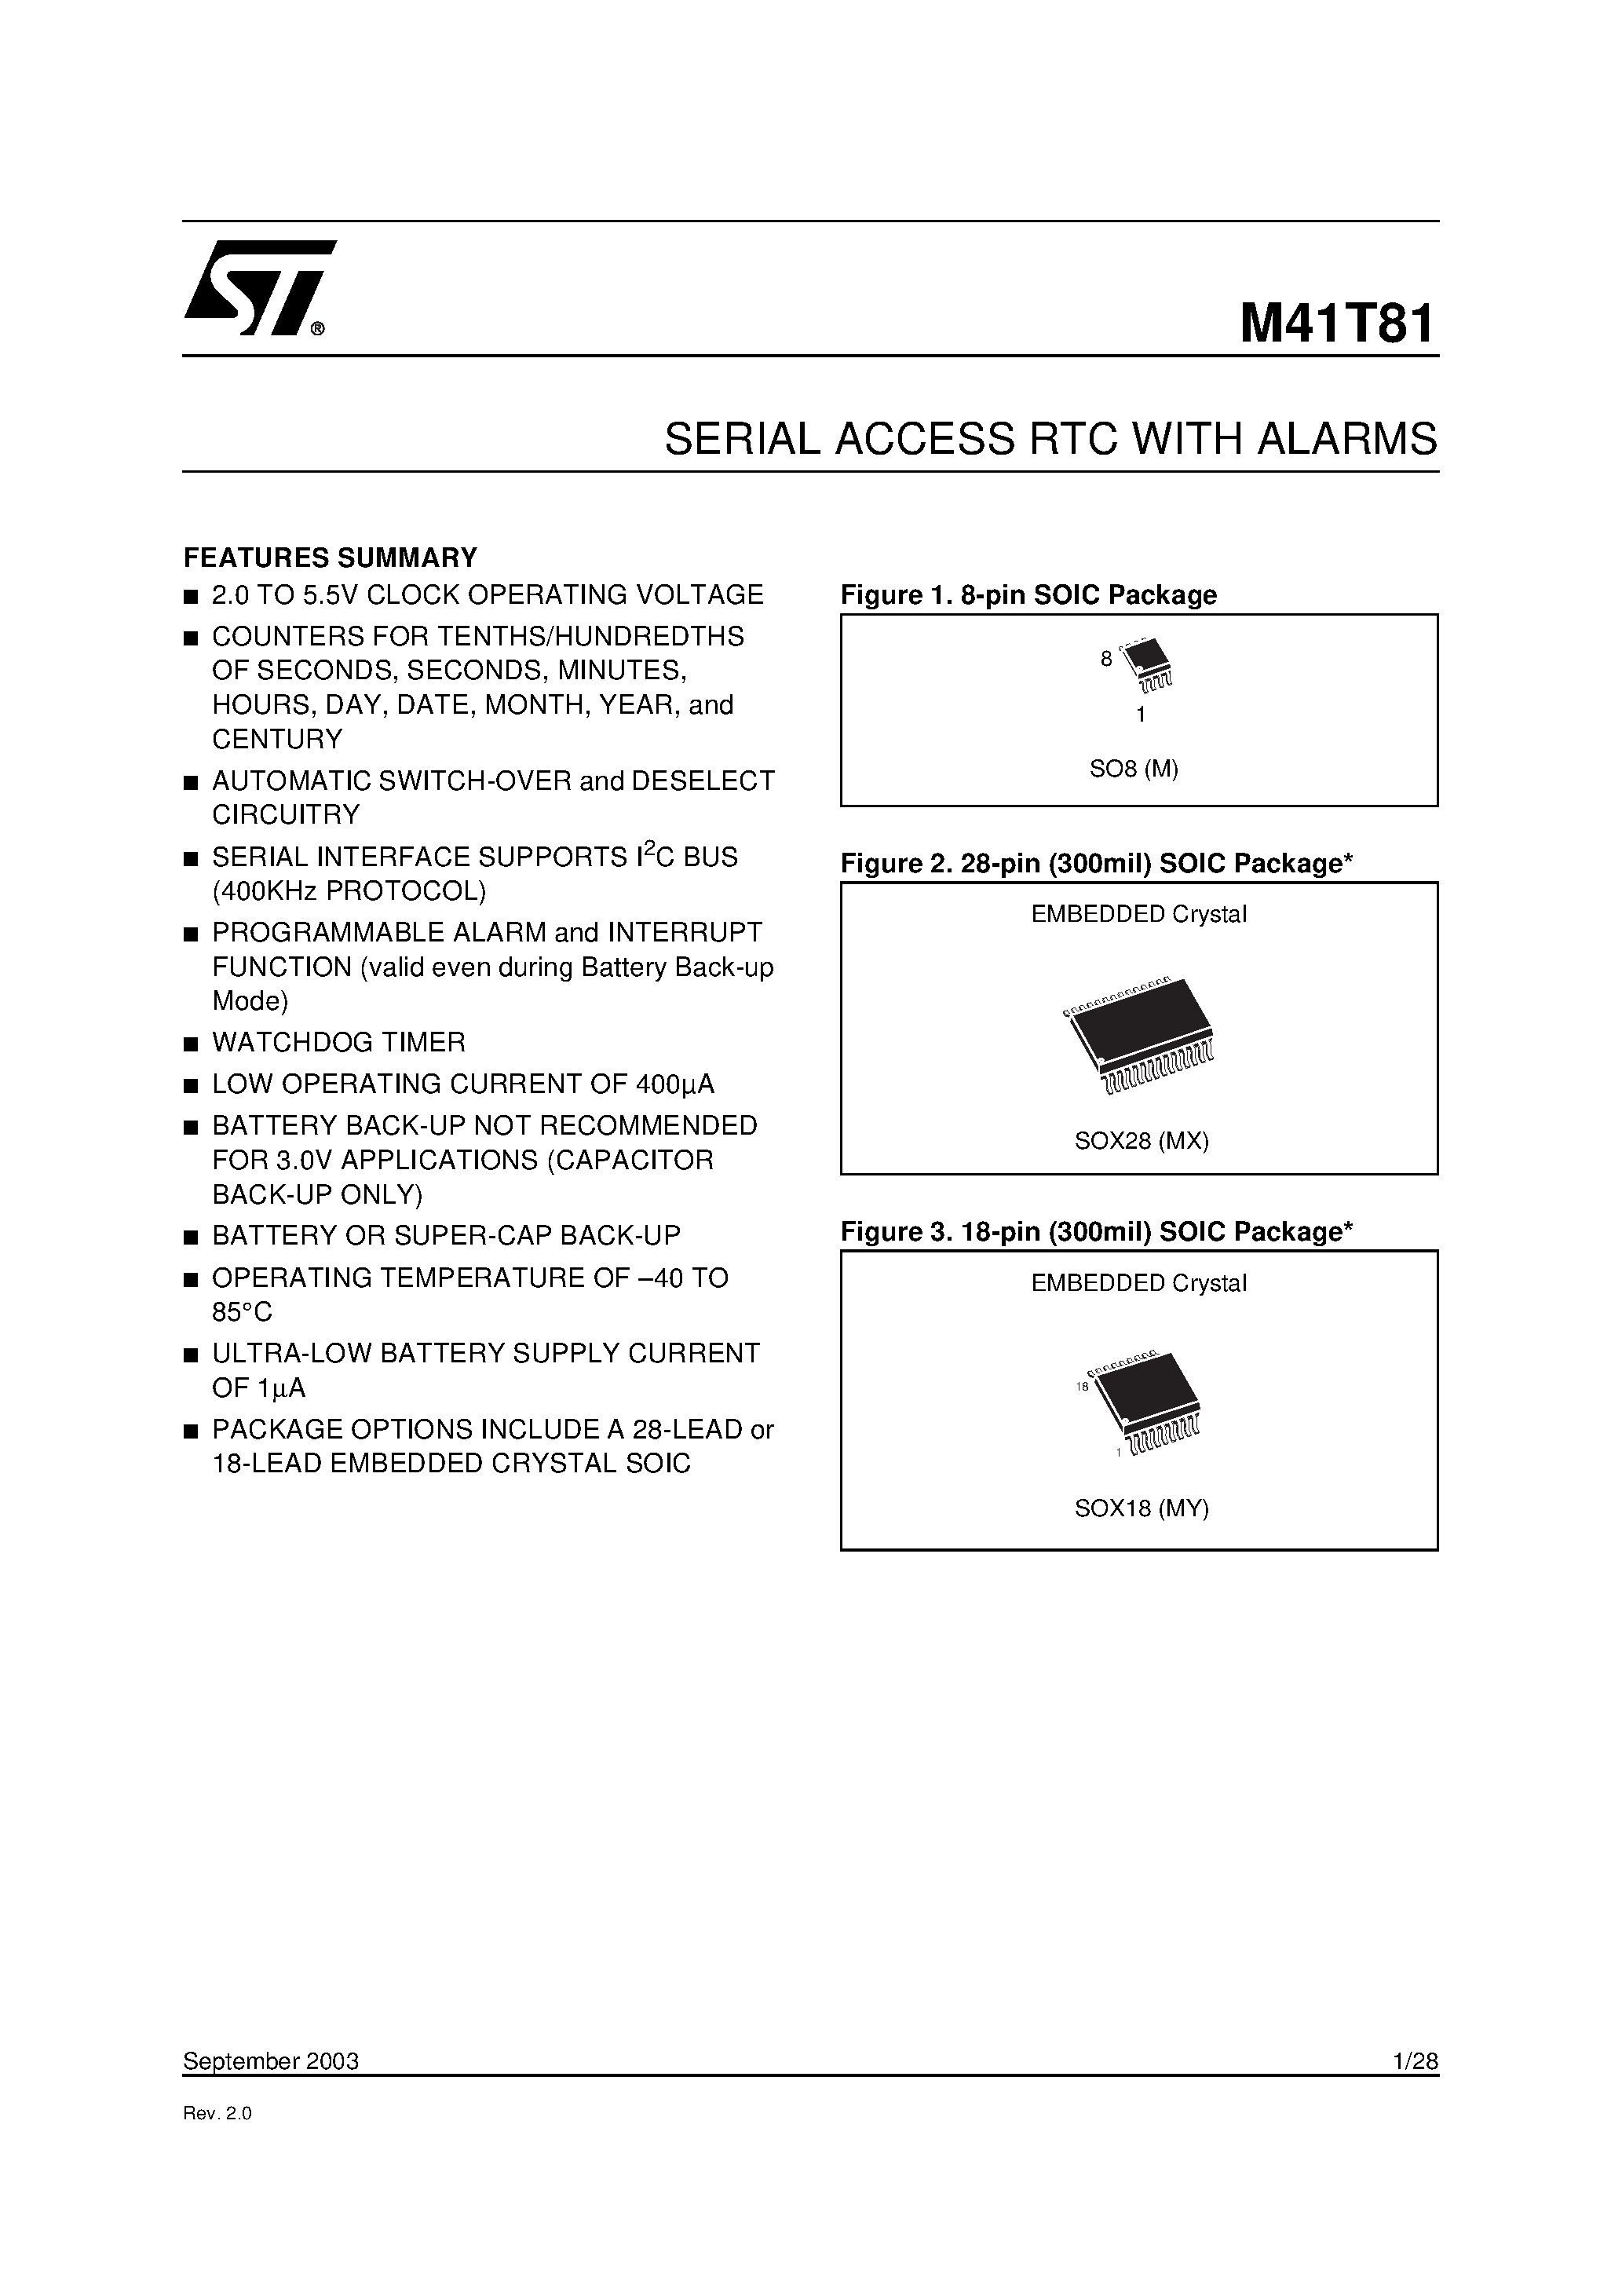 Datasheet M41T81MY6 - SERIAL ACCESS RTC WITH ALARMS page 1